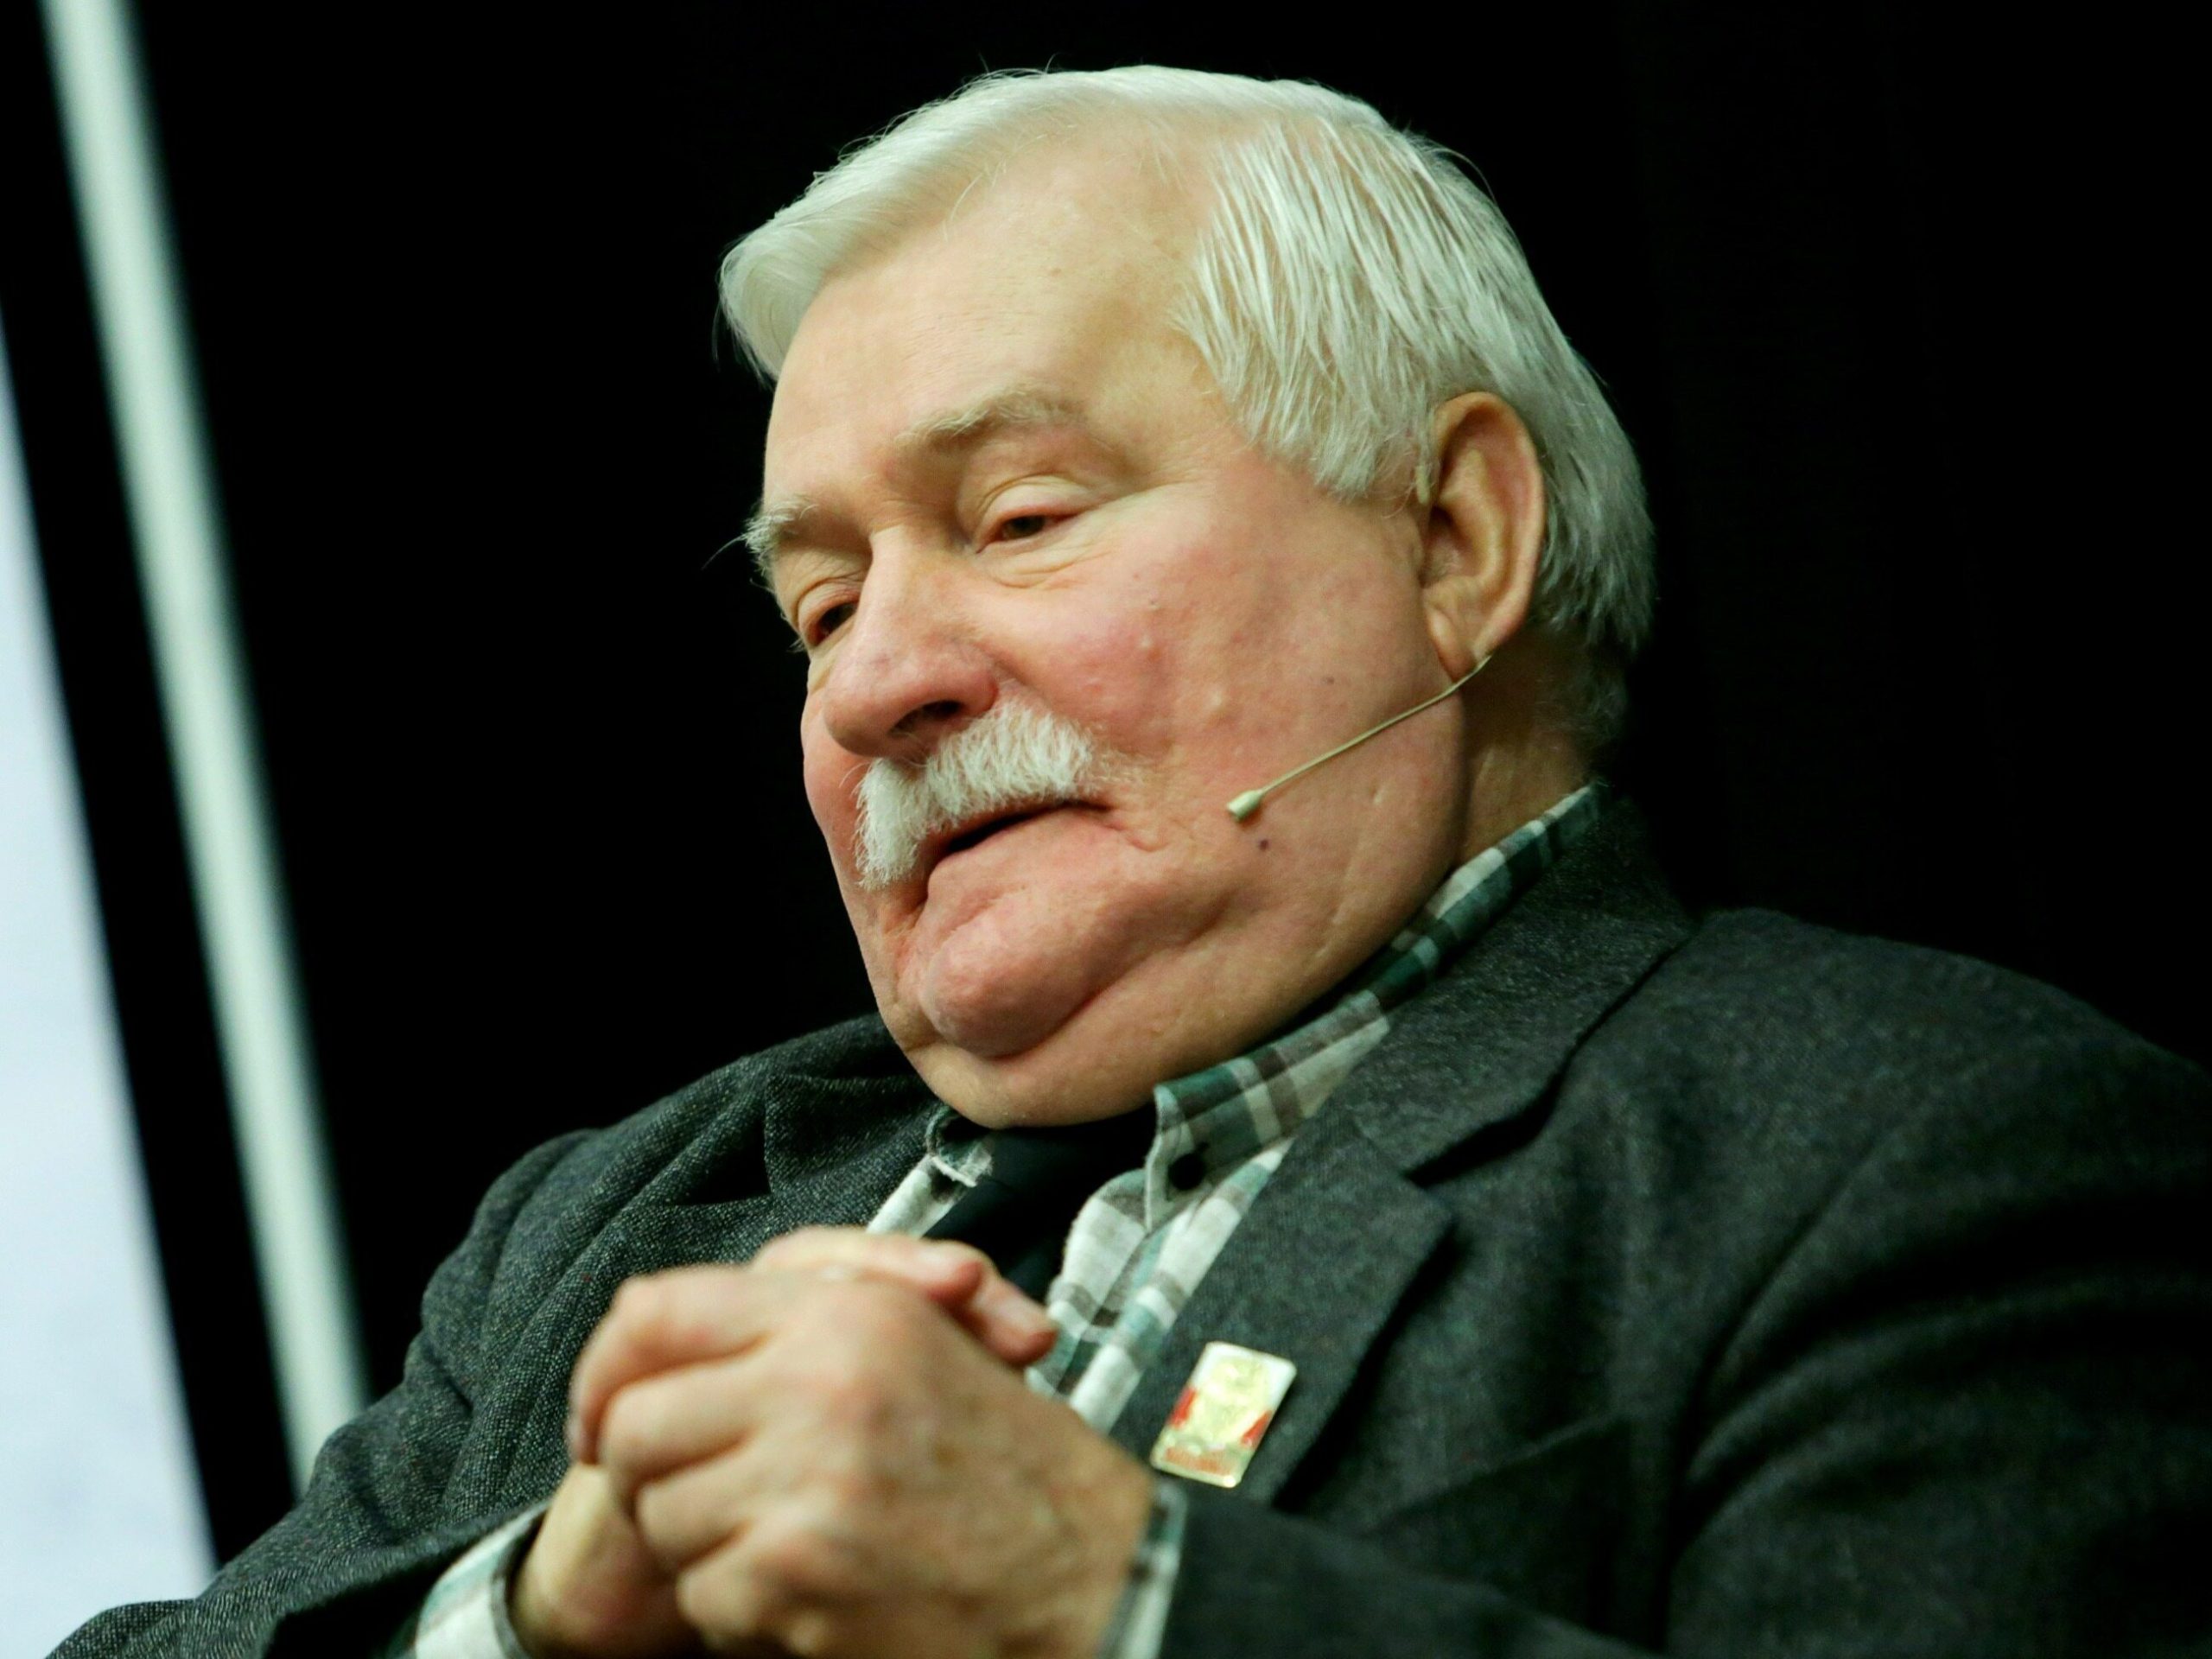 The former president lectures in the USA.  "If you don't listen to old Wałęsa, we will destroy civilization"